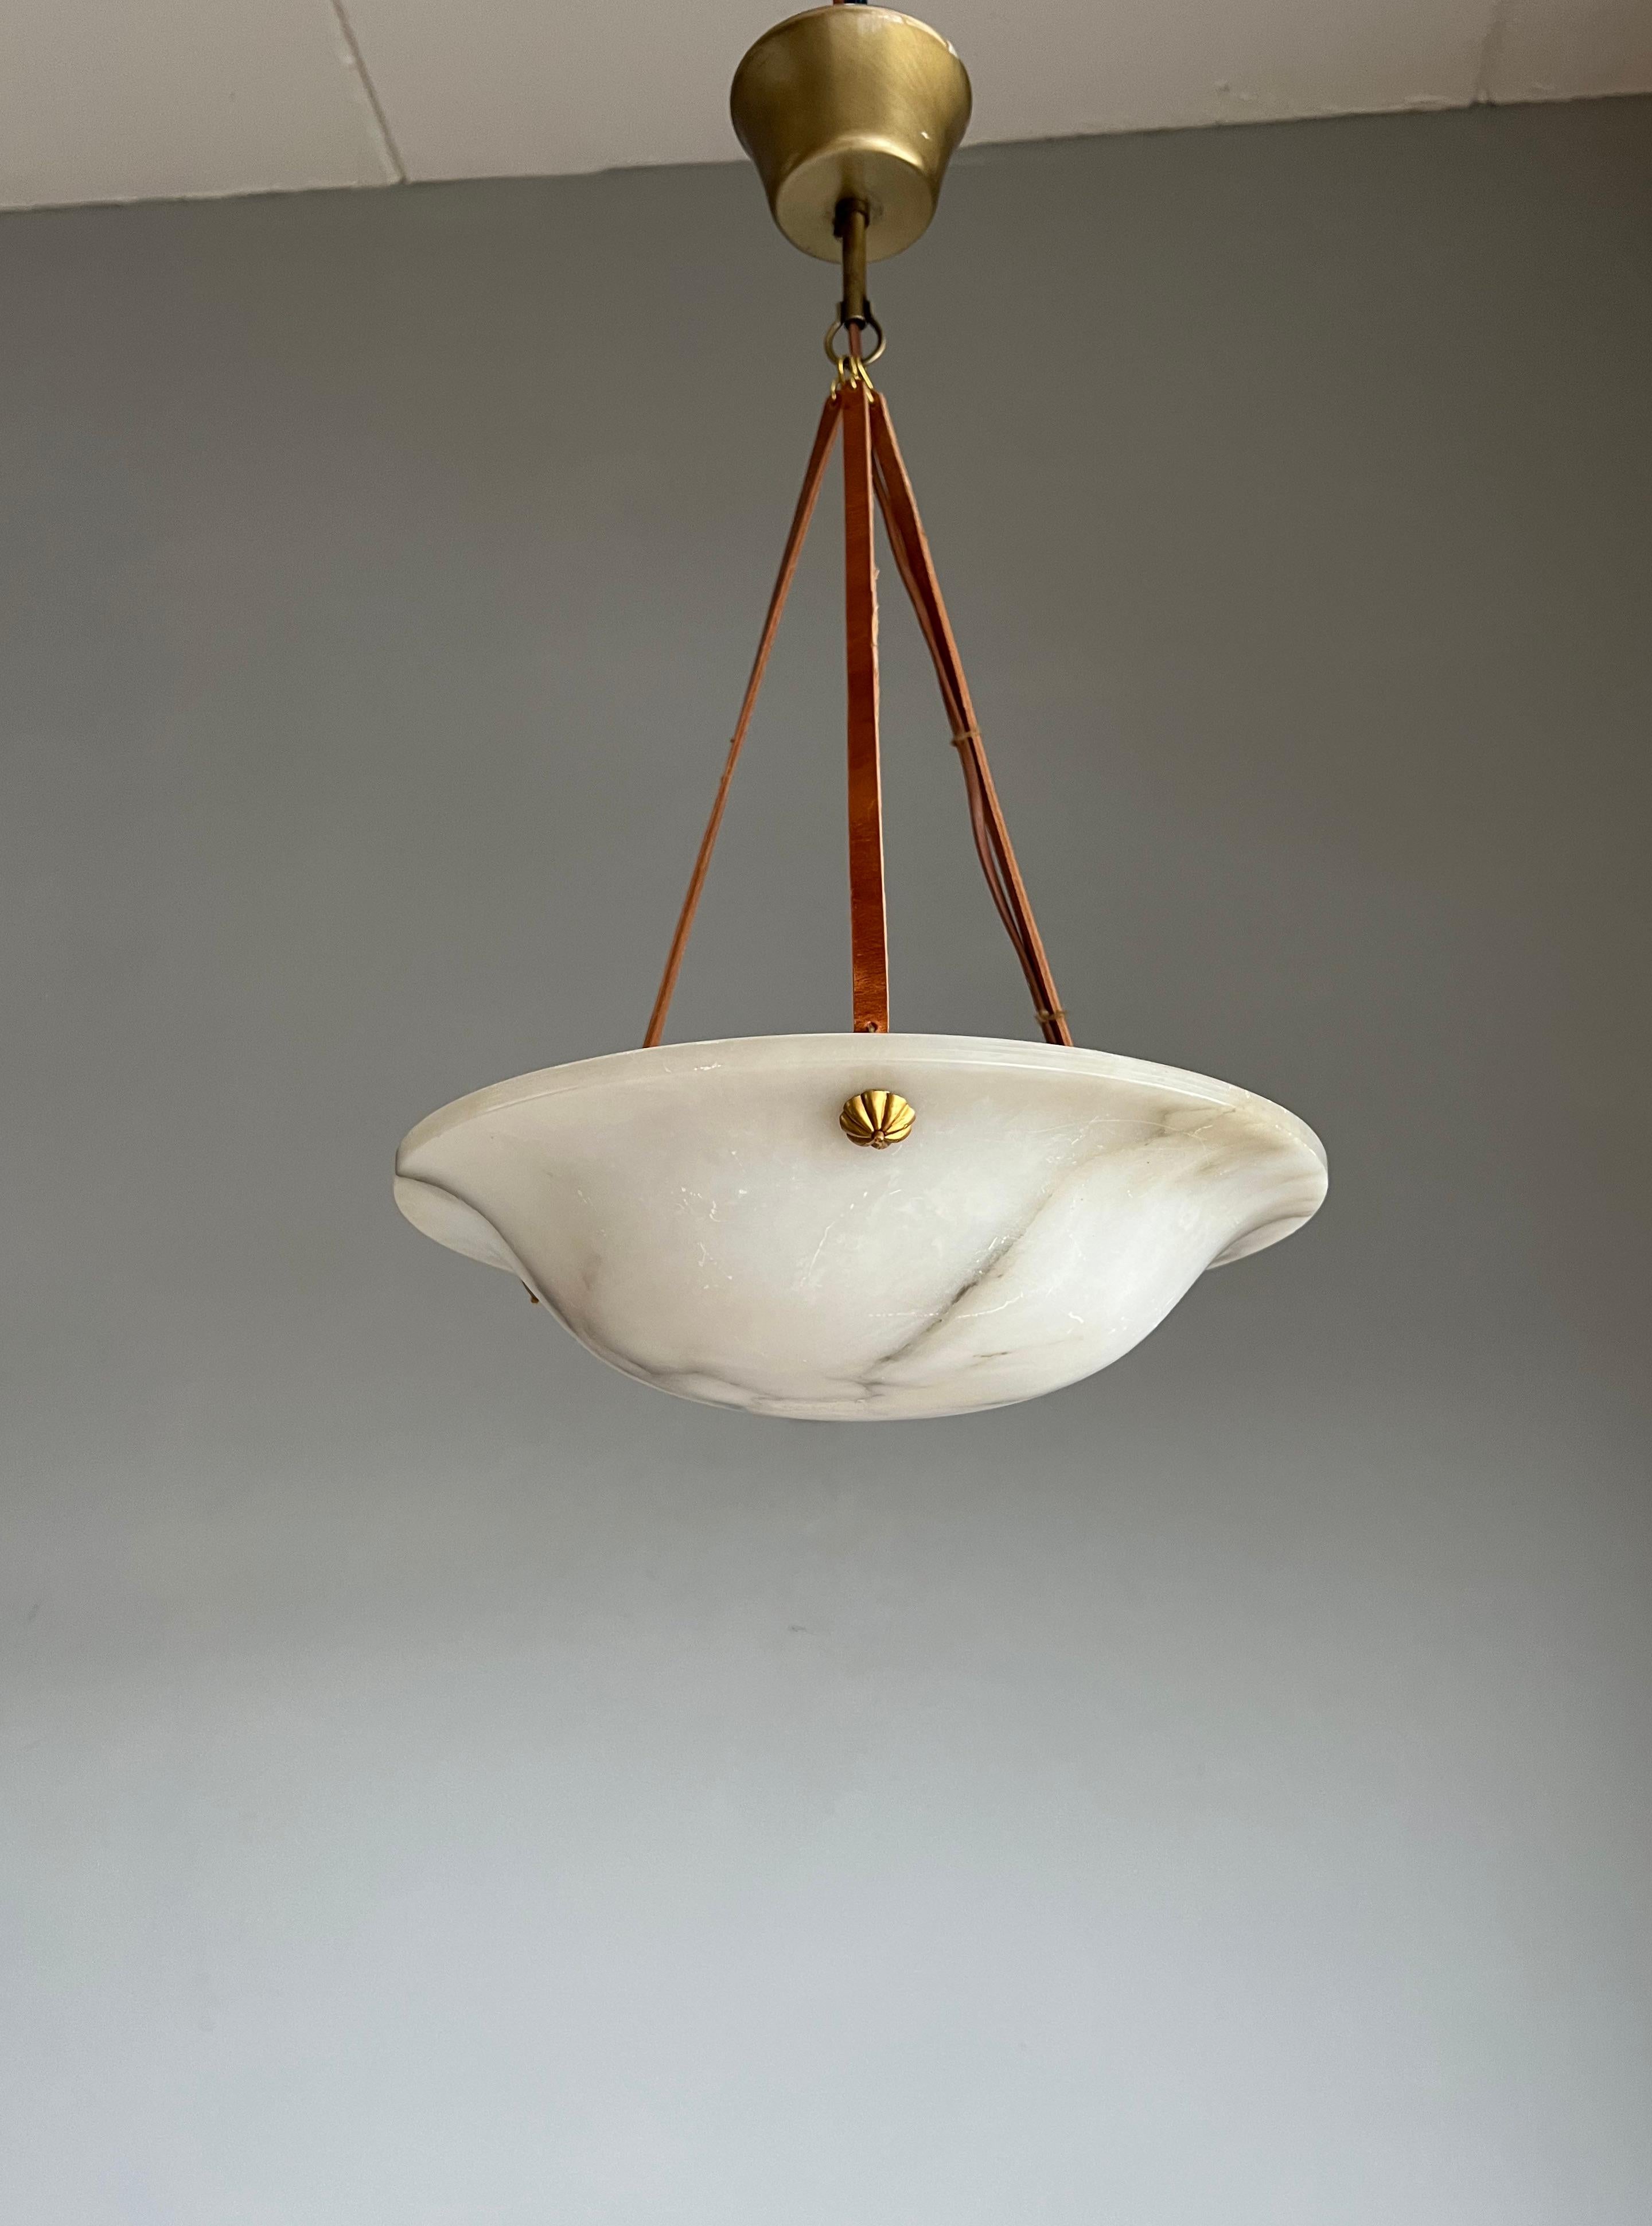 French Art Deco elegance for the collectors and enthusiasts of antique light fixtures.

If you are looking for a small size, beautiful, timeless and ready to use alabaster chandelier then this striking little French specimen from circa 1920 could